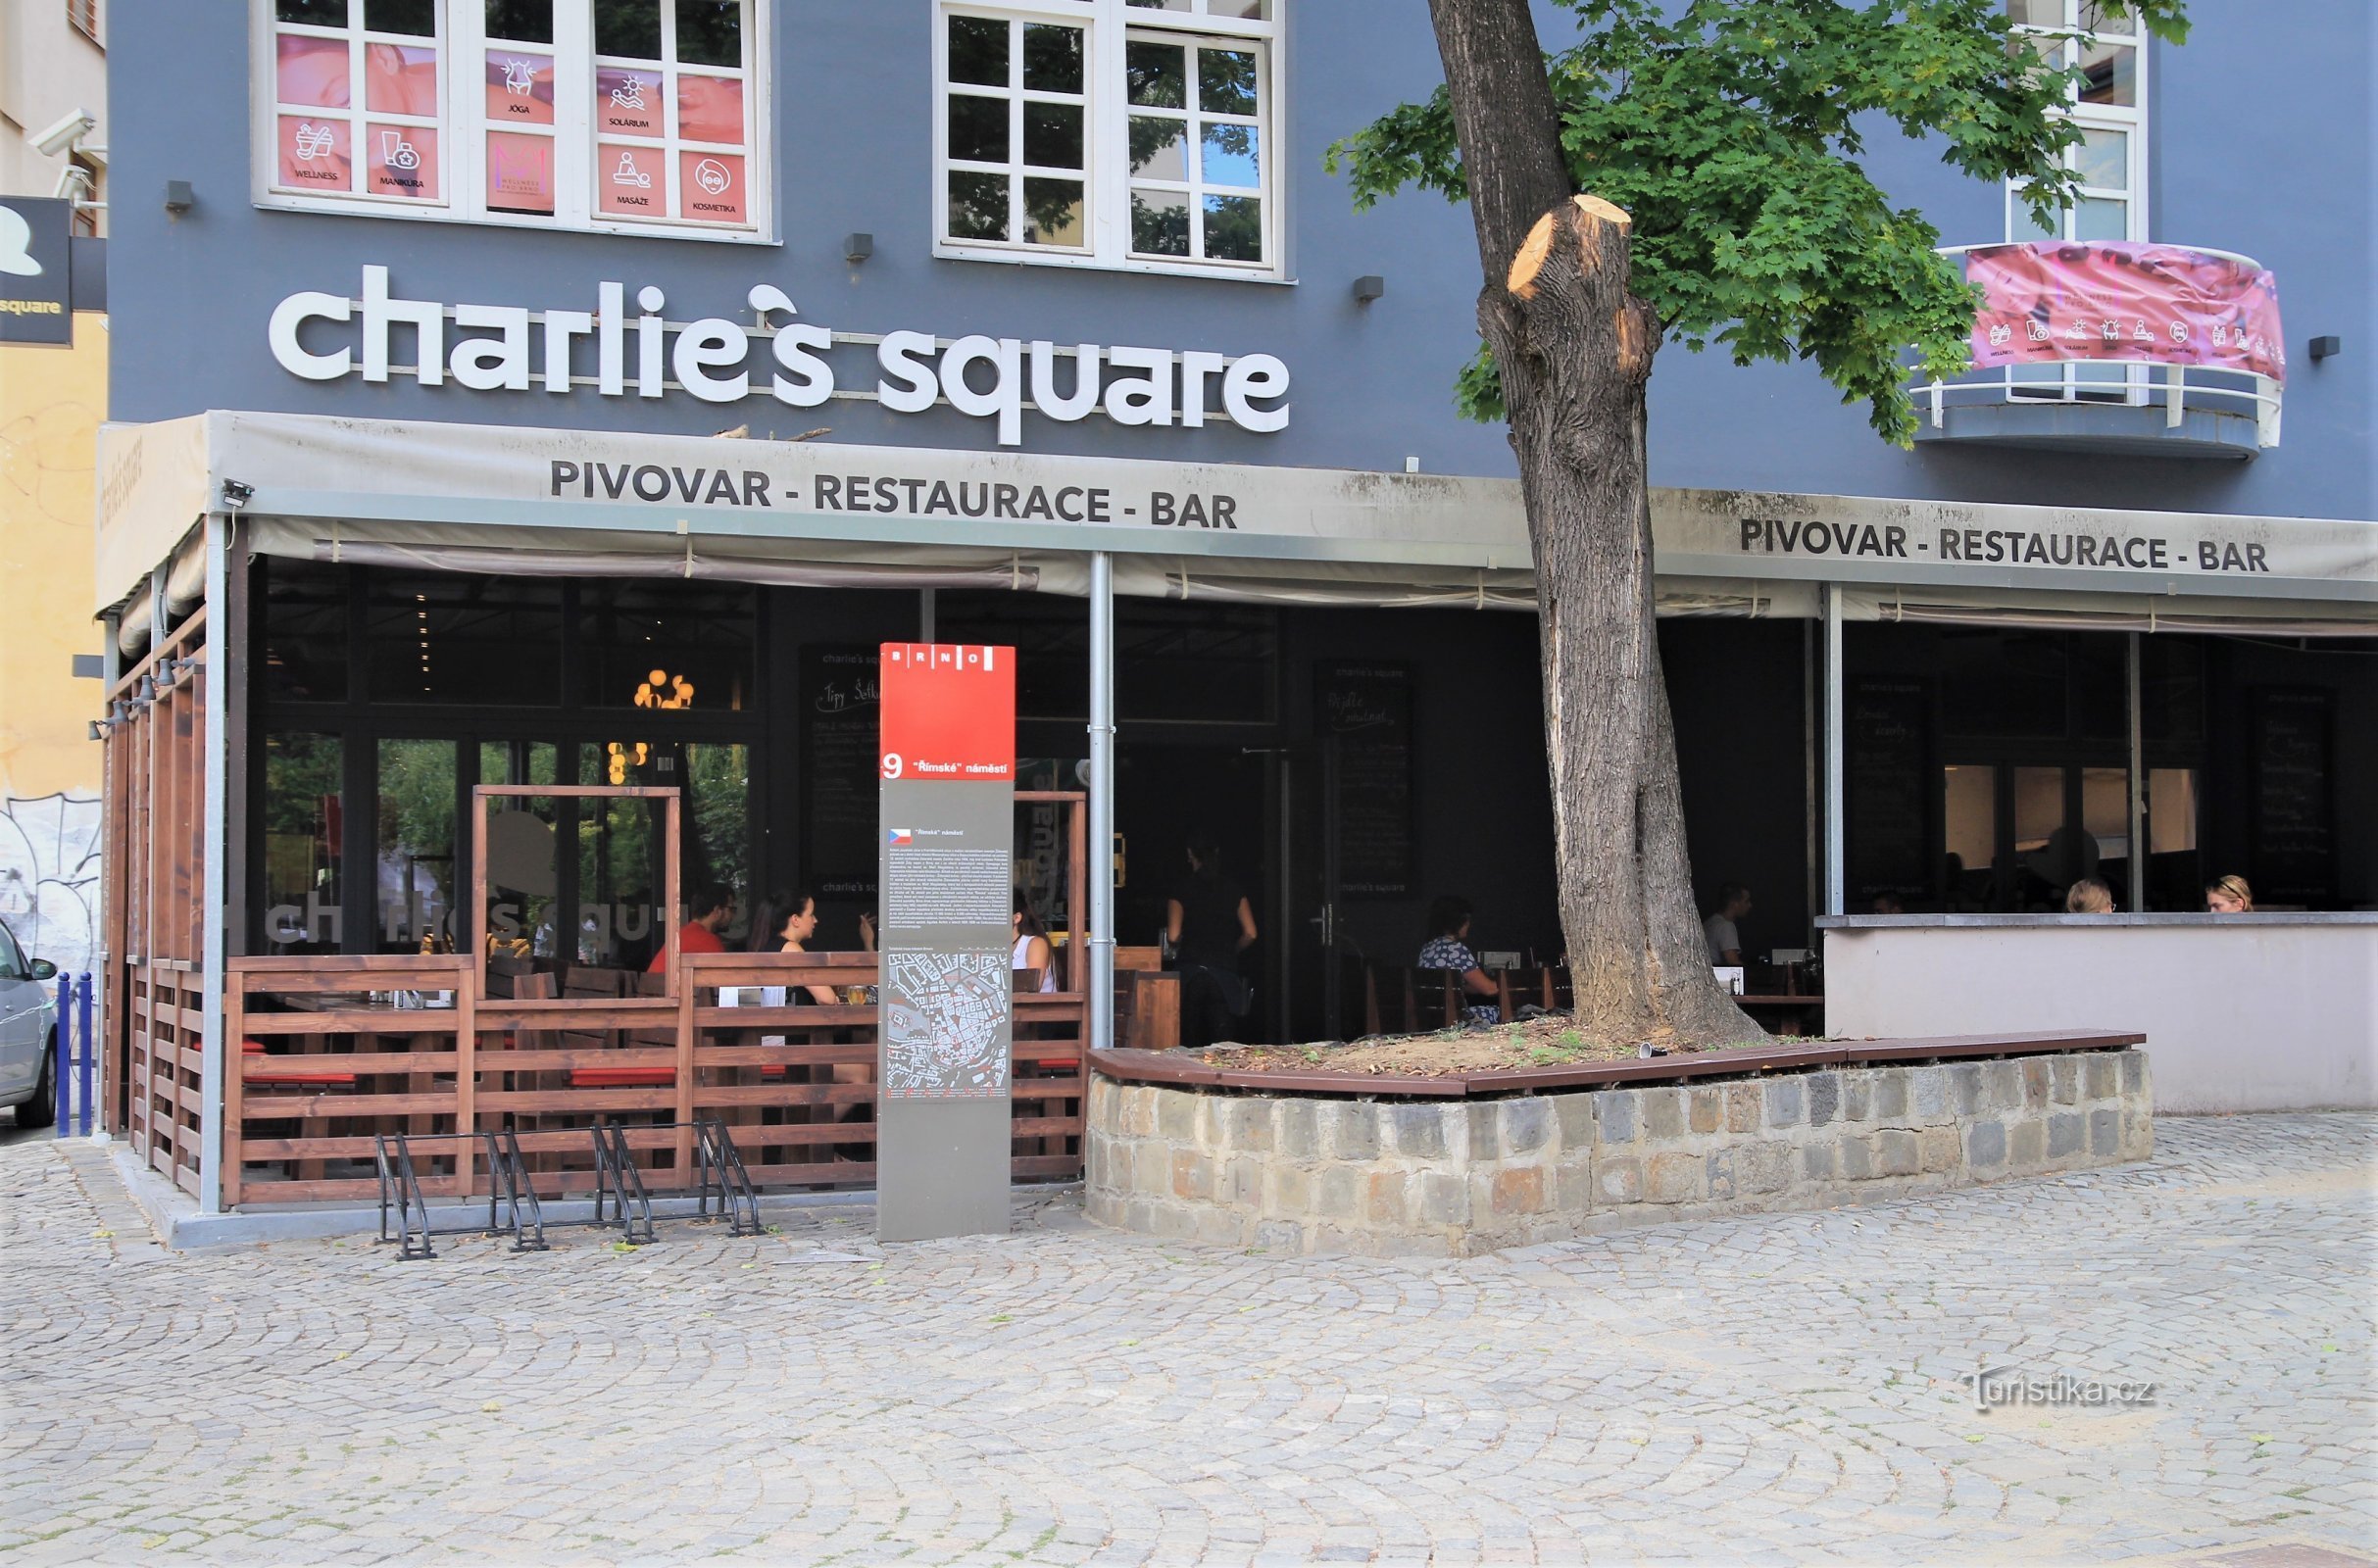 Charlie's Square microbrewery with a stylish restaurant